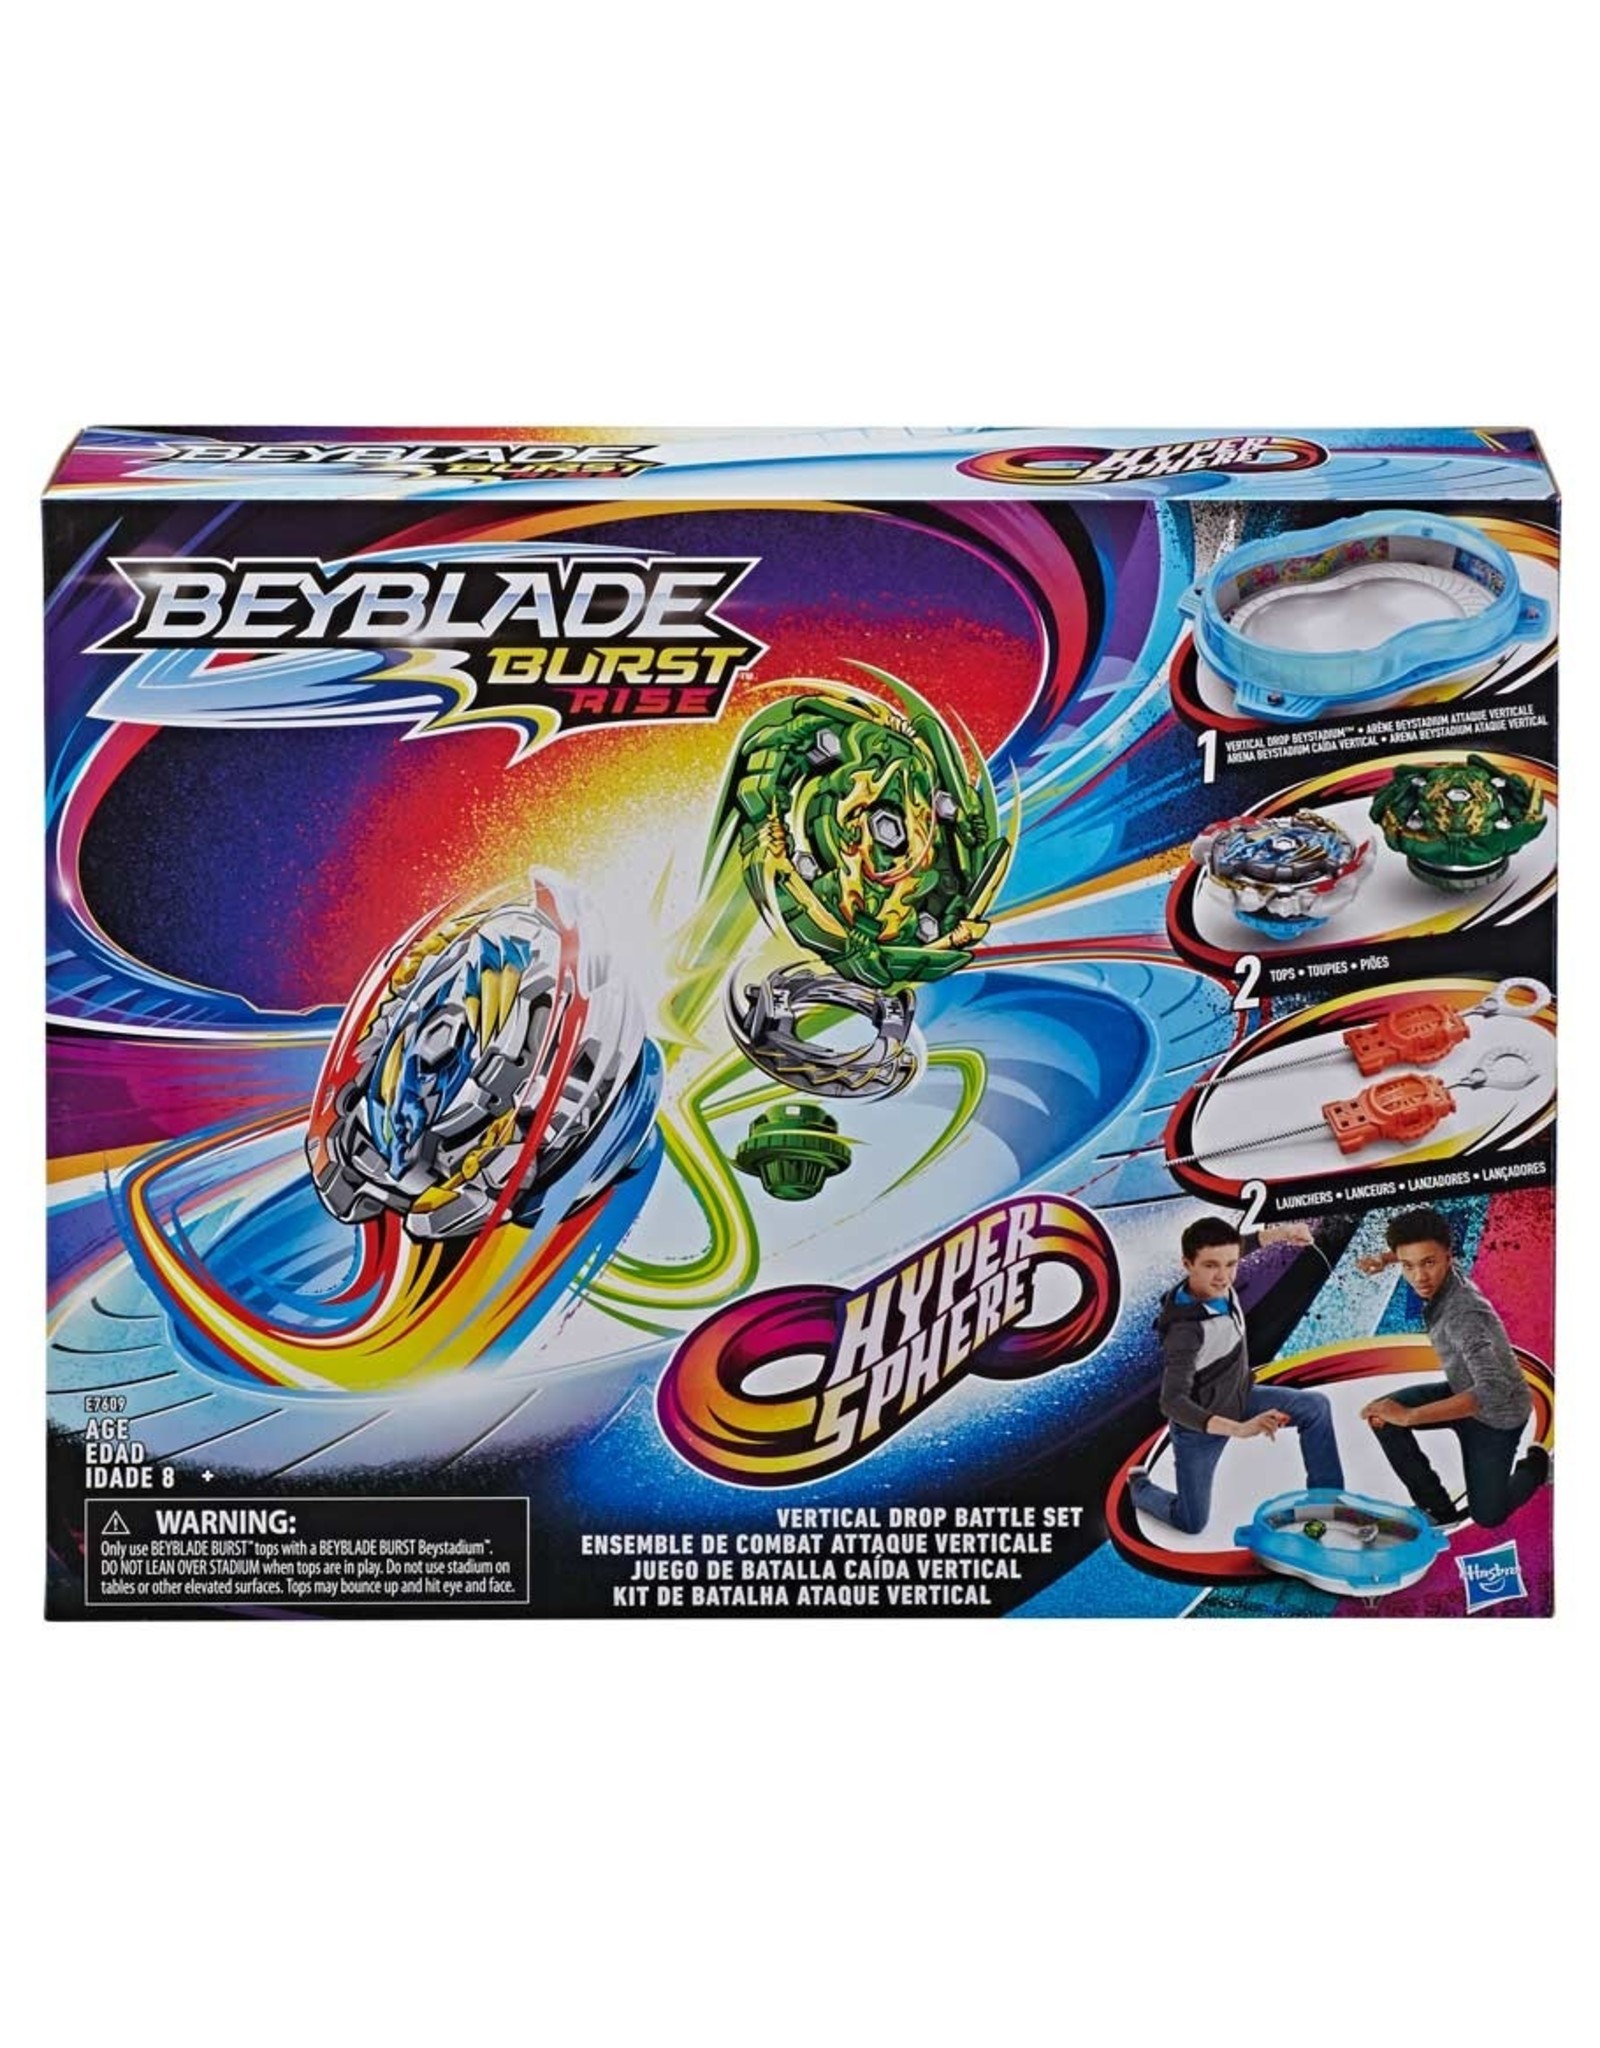 Beyblade Burst Scan Codes Accessory / Beyblade Burst Codes Image Search